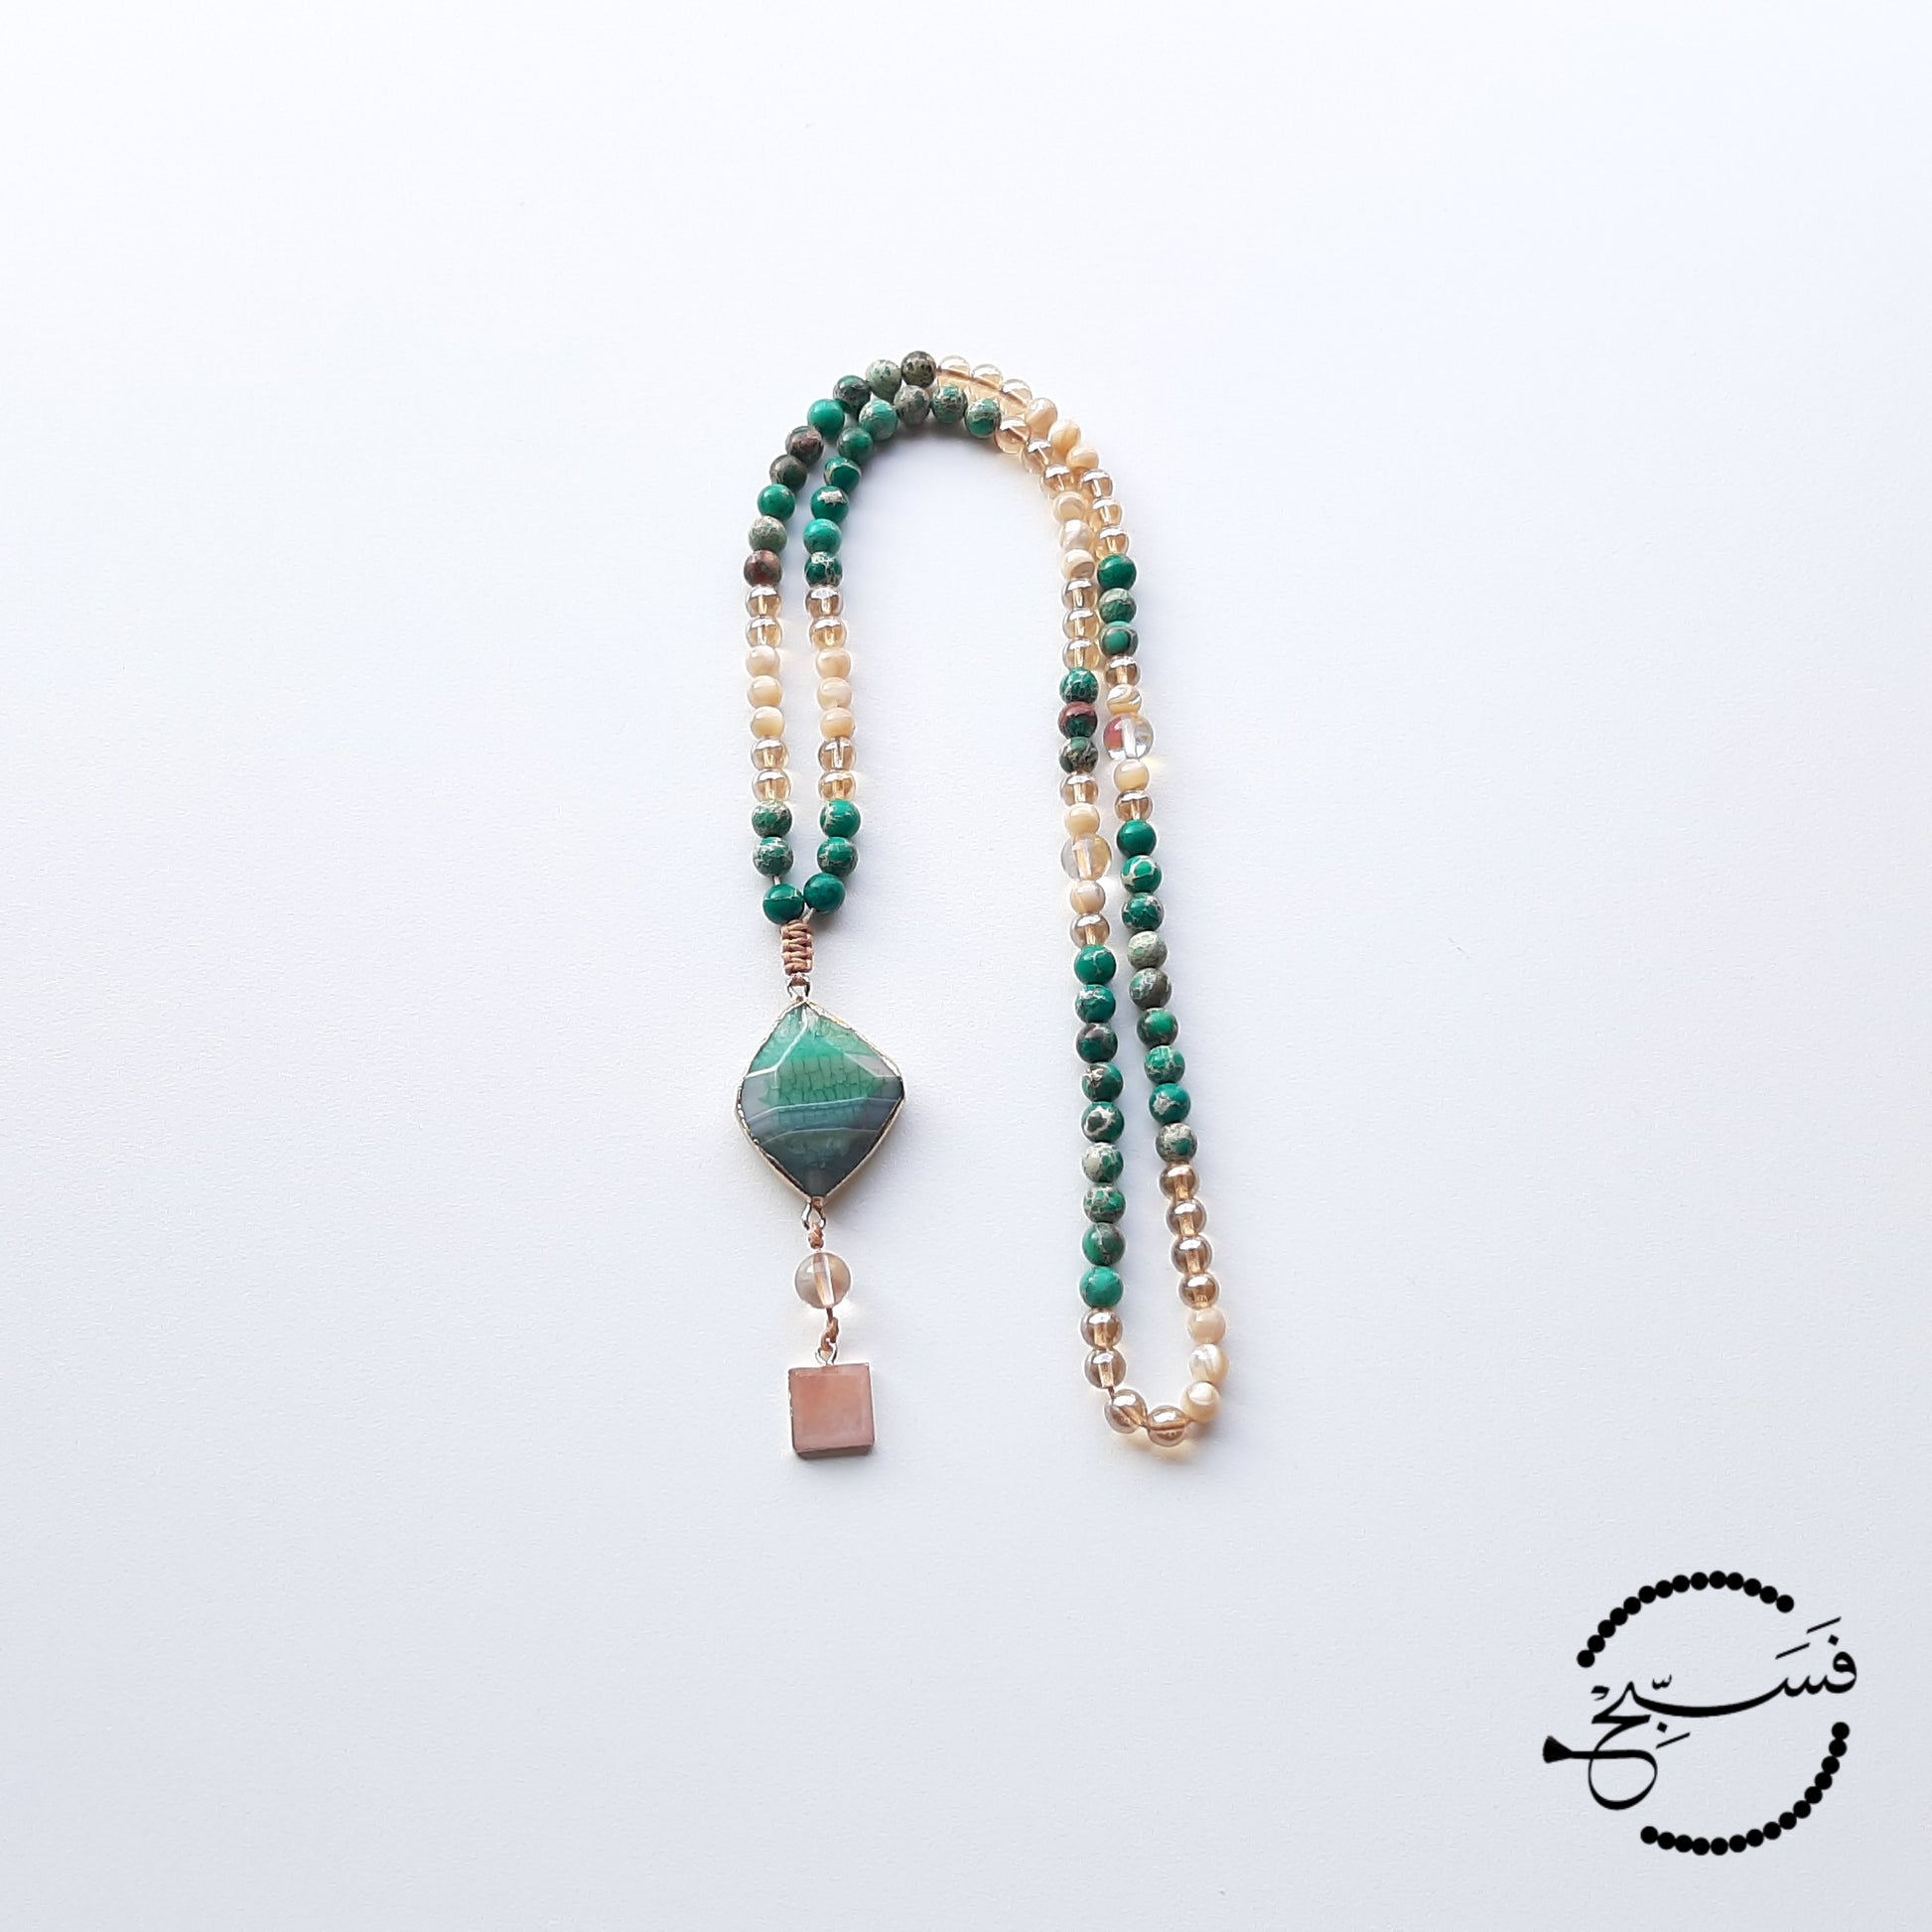 Shades of gold and beige trochus shell are combined with gorgeous deep green sea sediment beads. Complimented beautifully with two pendants: Brazilian green agate and quartz.  Packaged in a luxurious pouch and a gift box.  99 beads